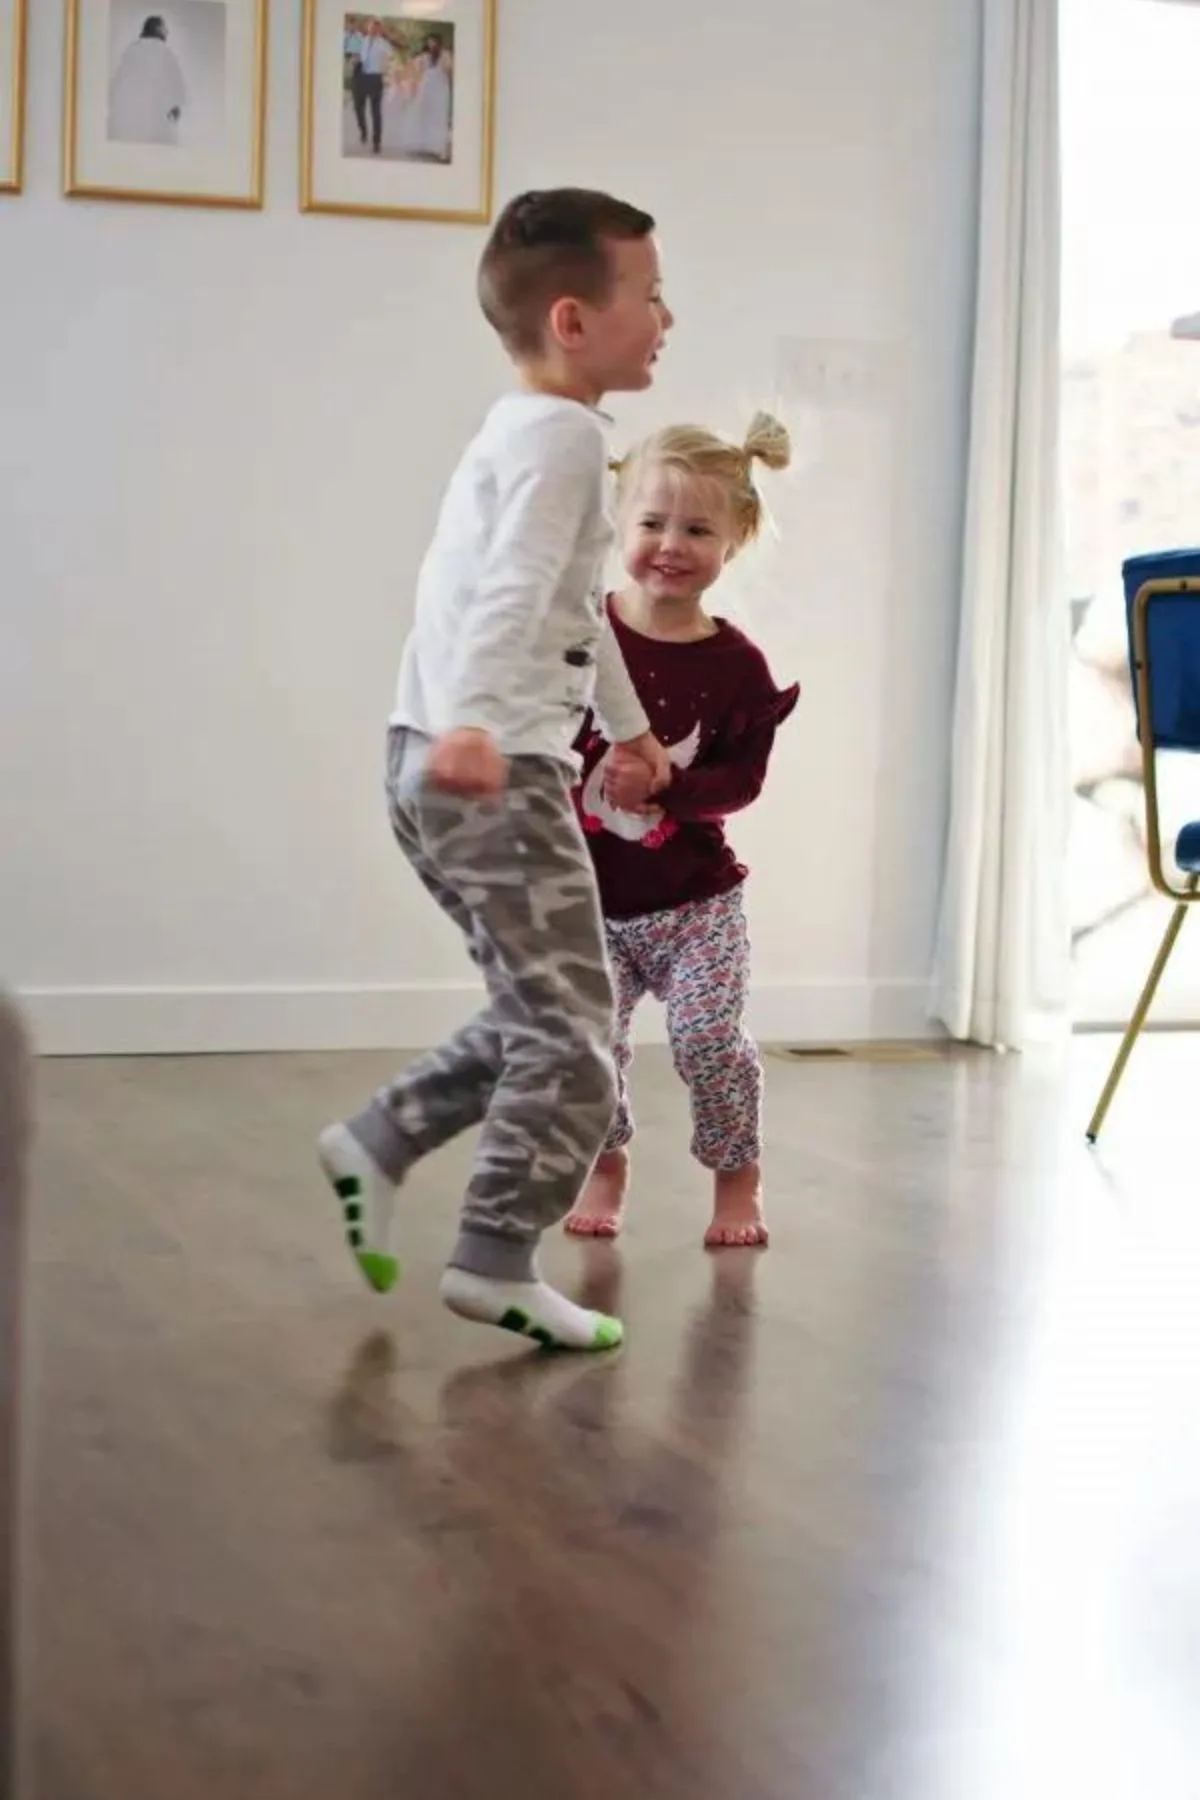 Children dance and clean laminate floors in the dining room.